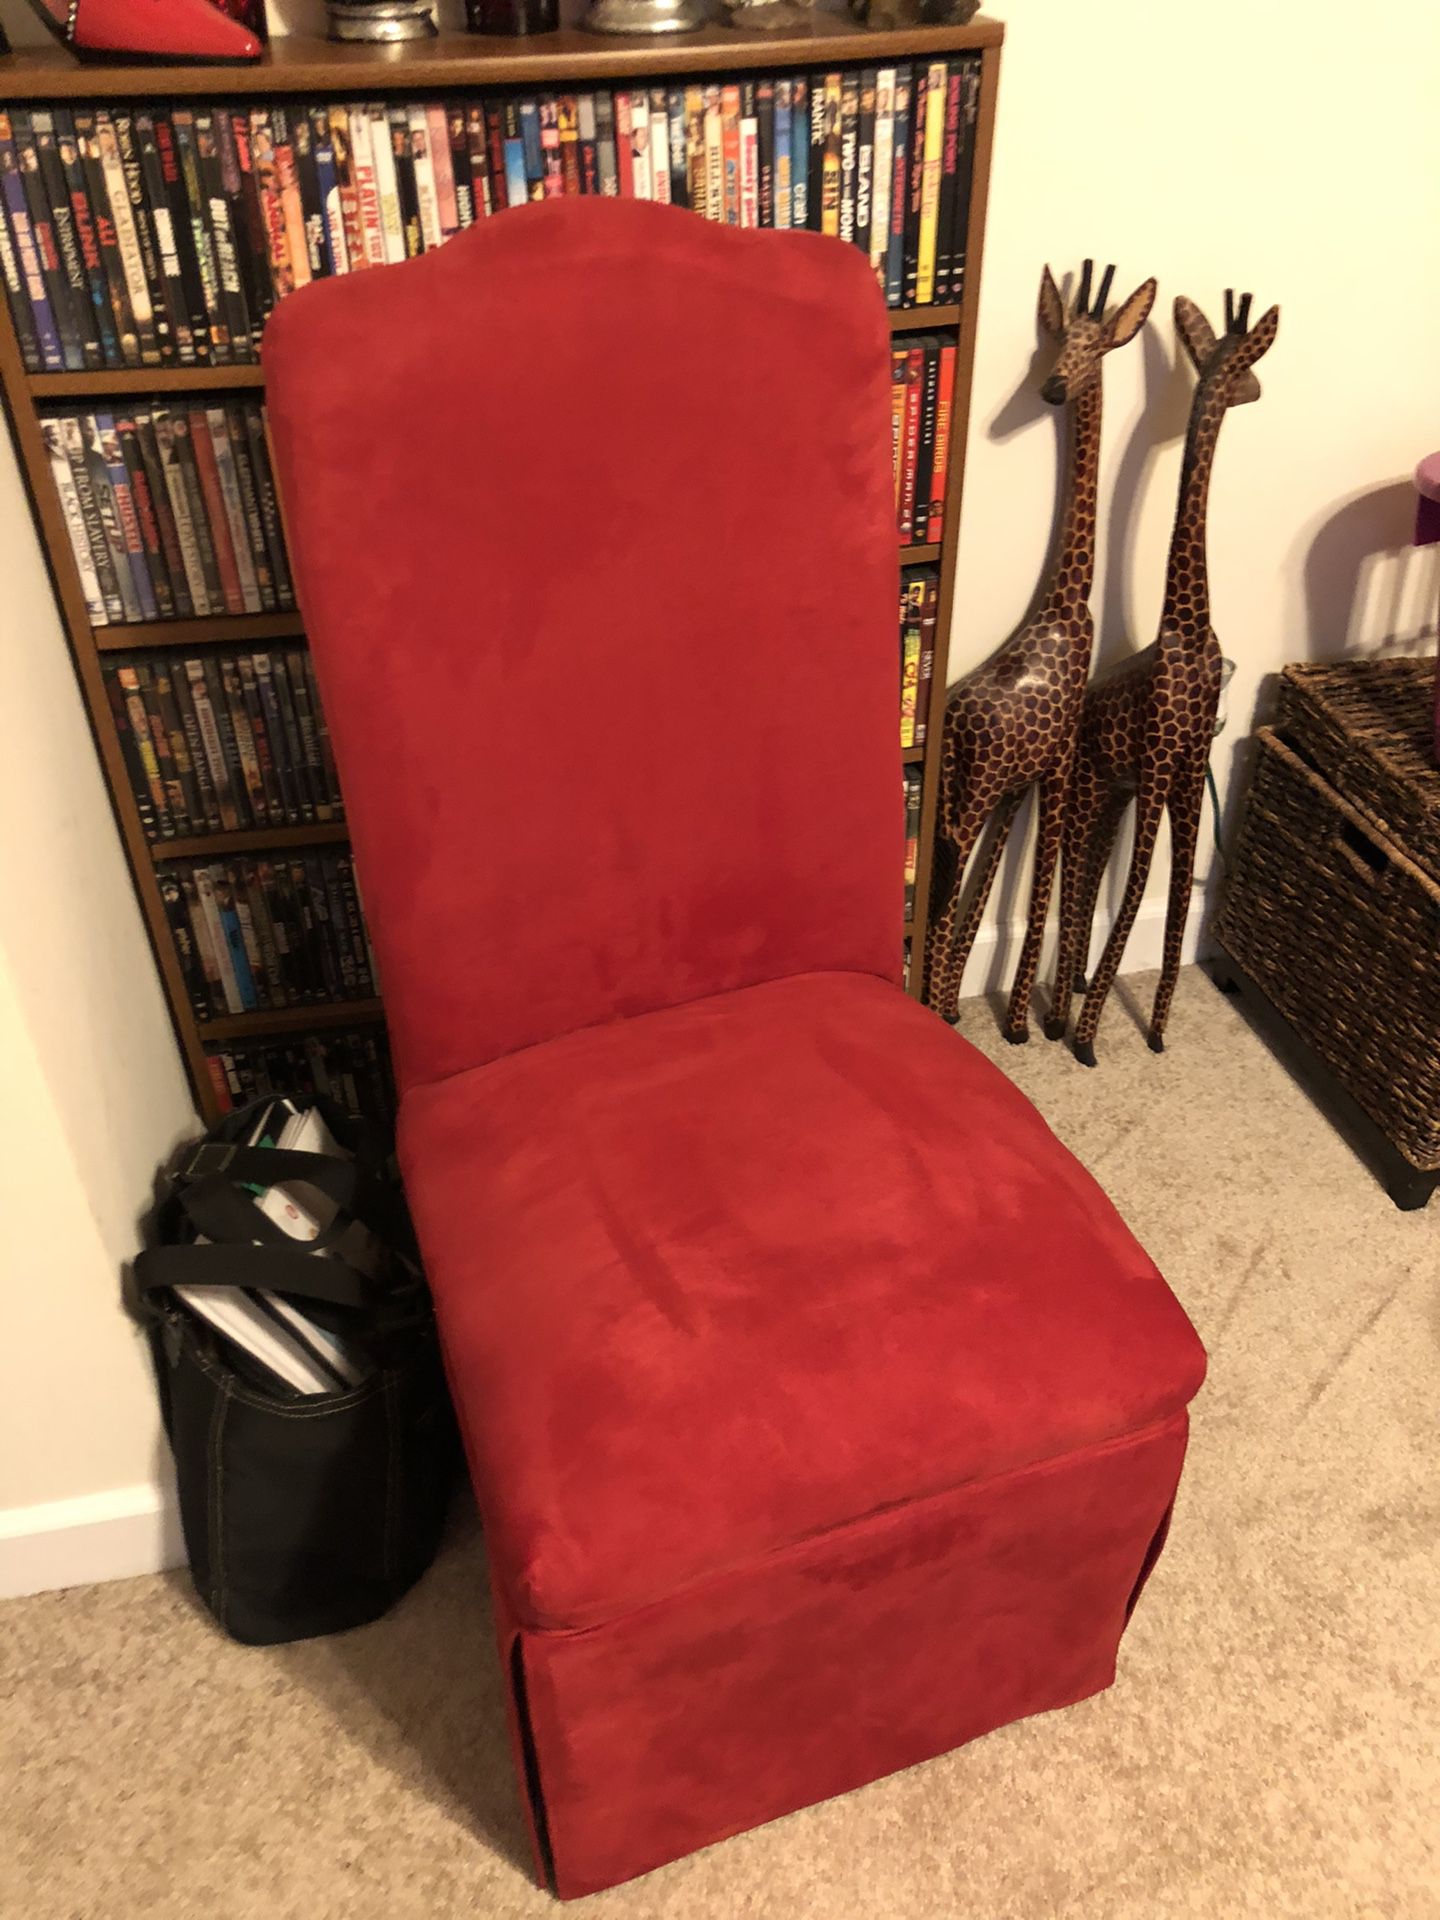 2 red chairs $50.00 firm. Barely used. Excellent condition